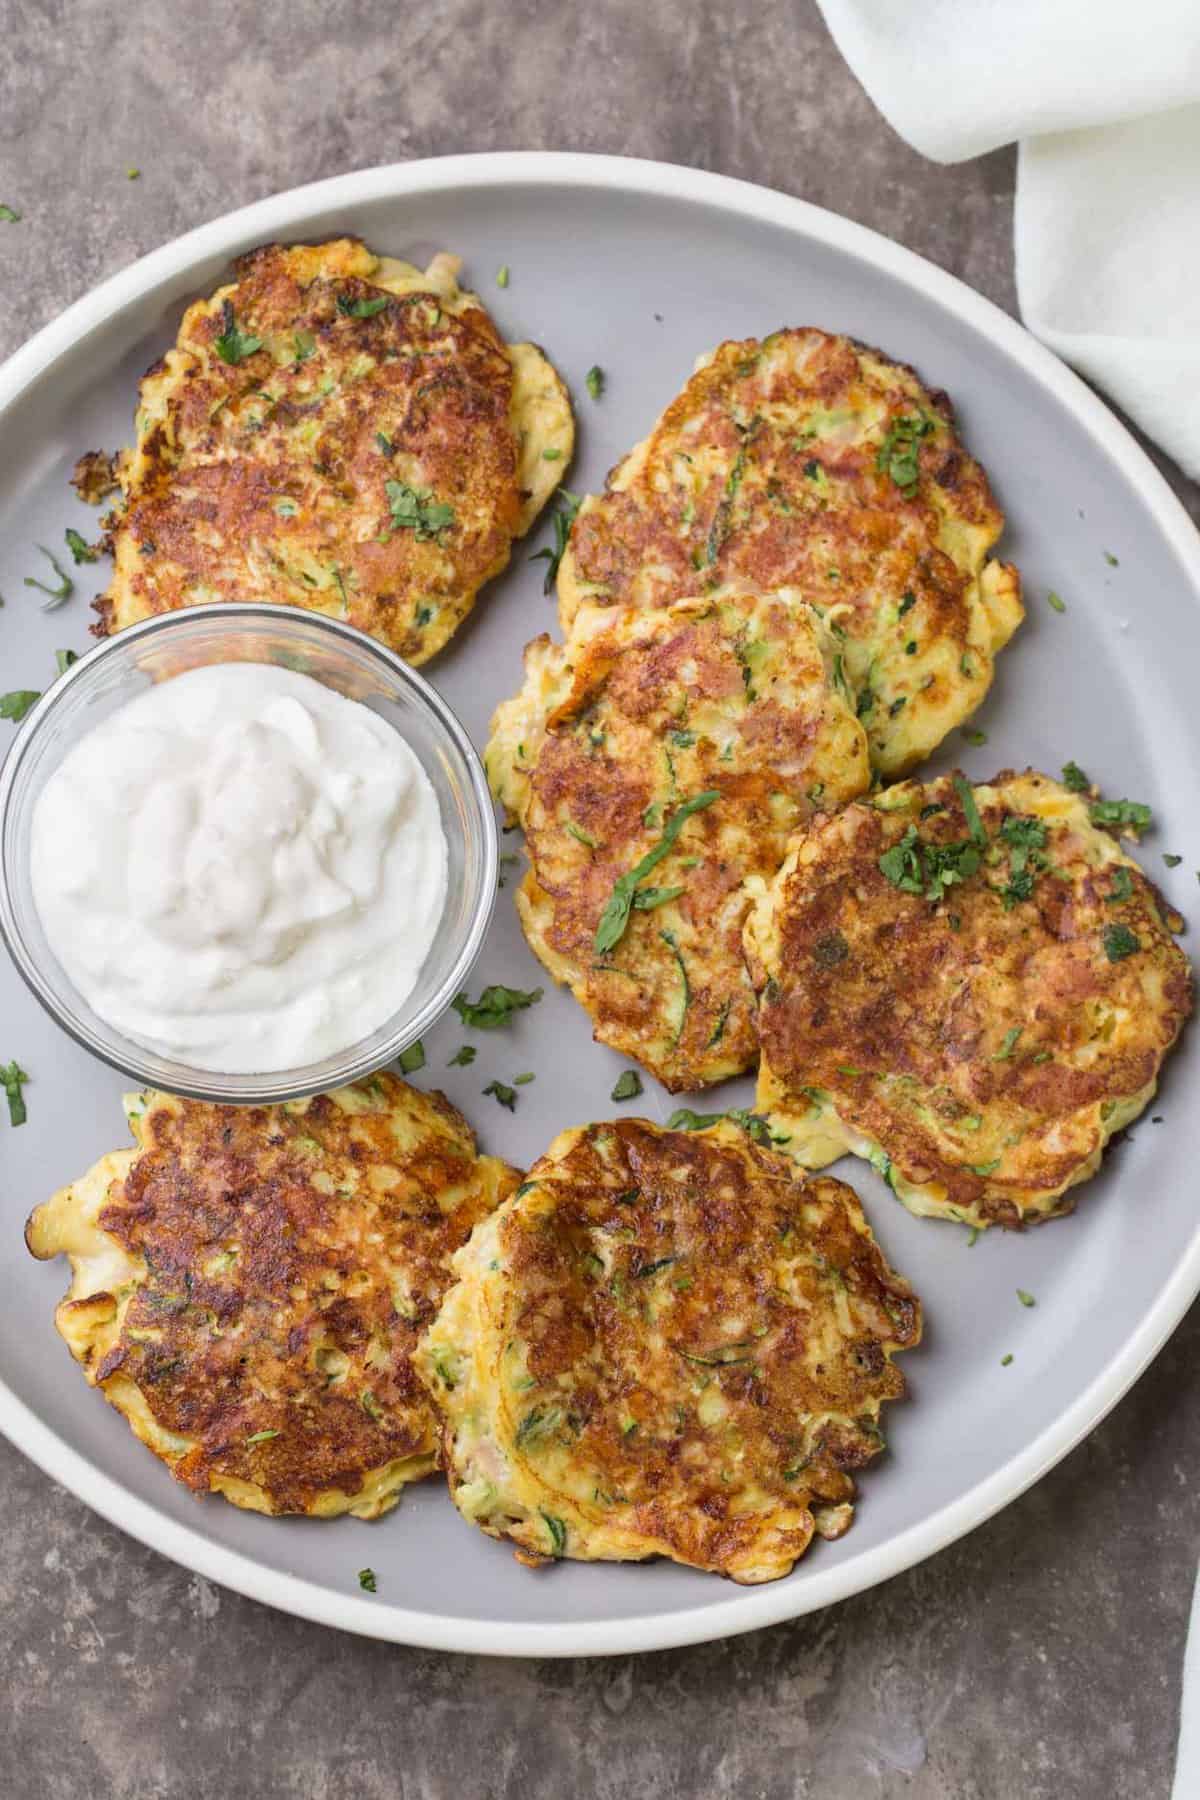 Breakfast Zucchini fritters on a plate with fresh herbs and sour cream dip.